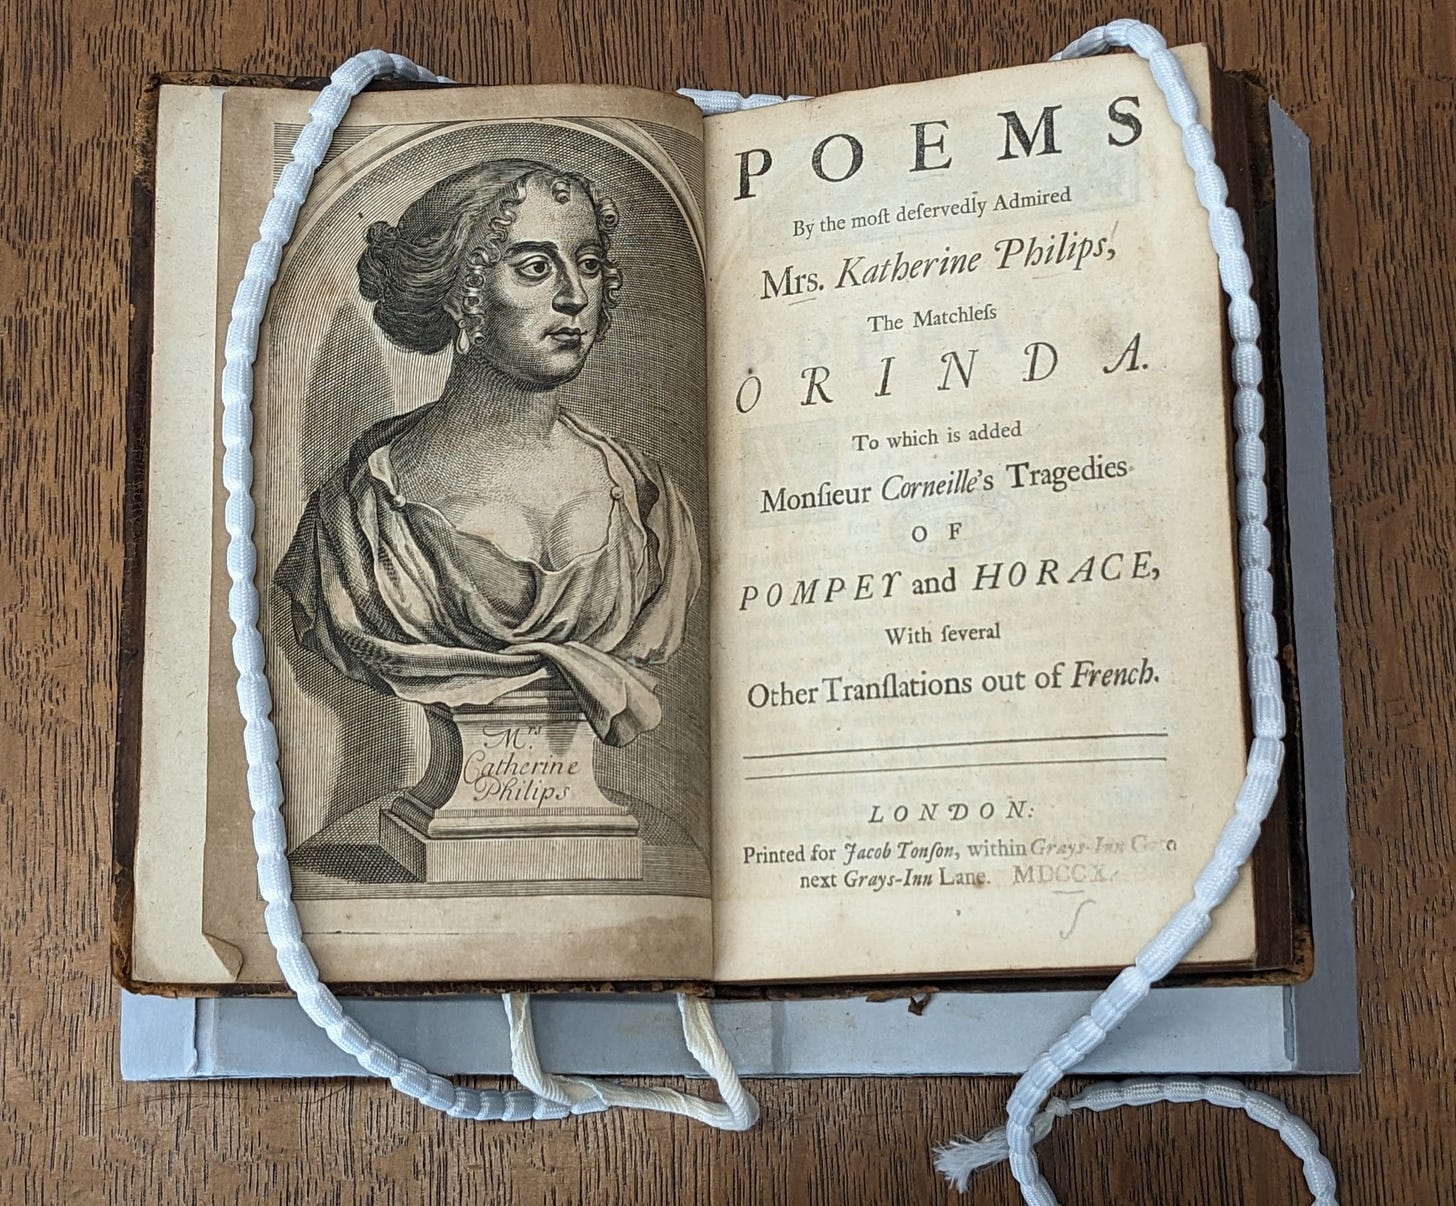 Frontispiece to Catherine Philips's book depicting her as a classical bust